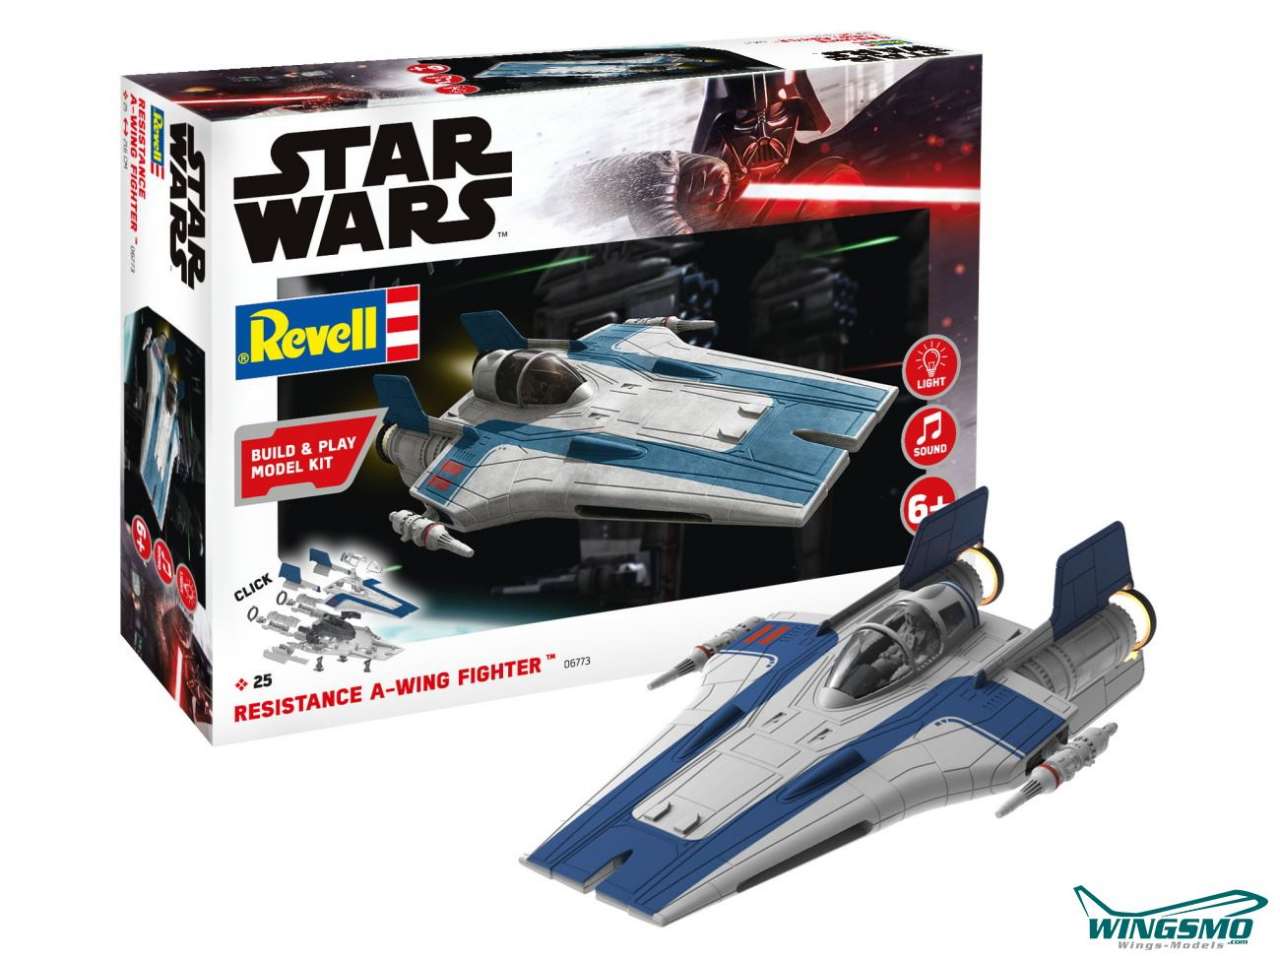 Revell Star Wars Resistance A-Wing Fighter Blue 1:44 06773